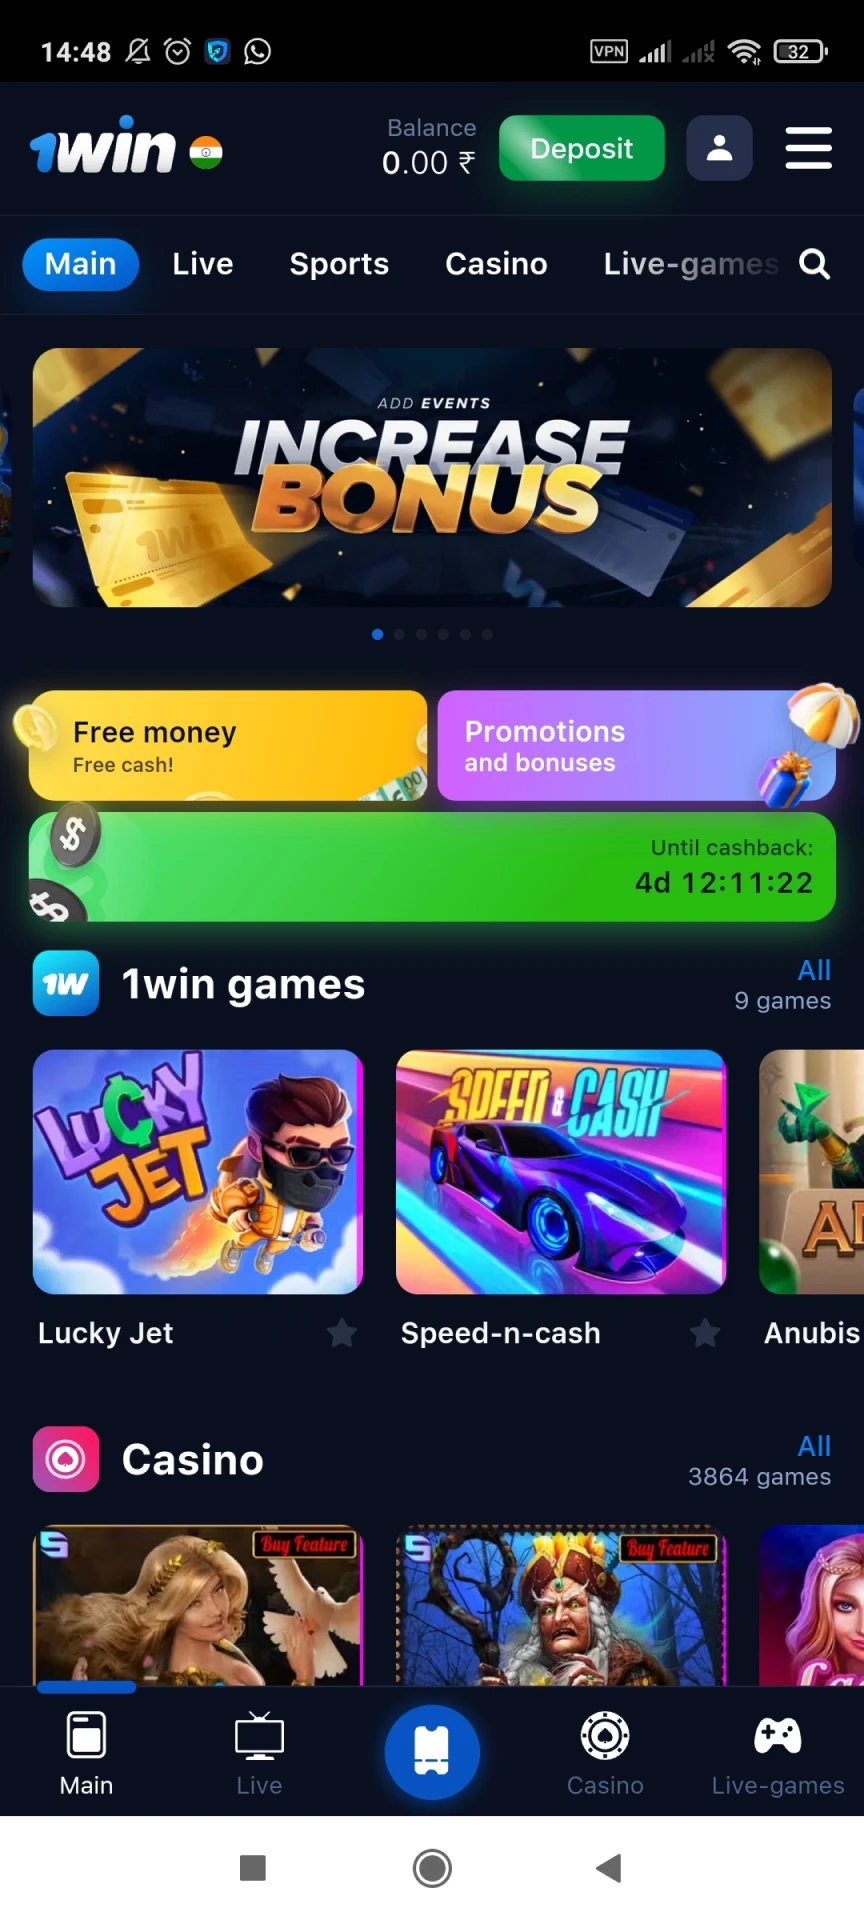 The home page of the 1win app.